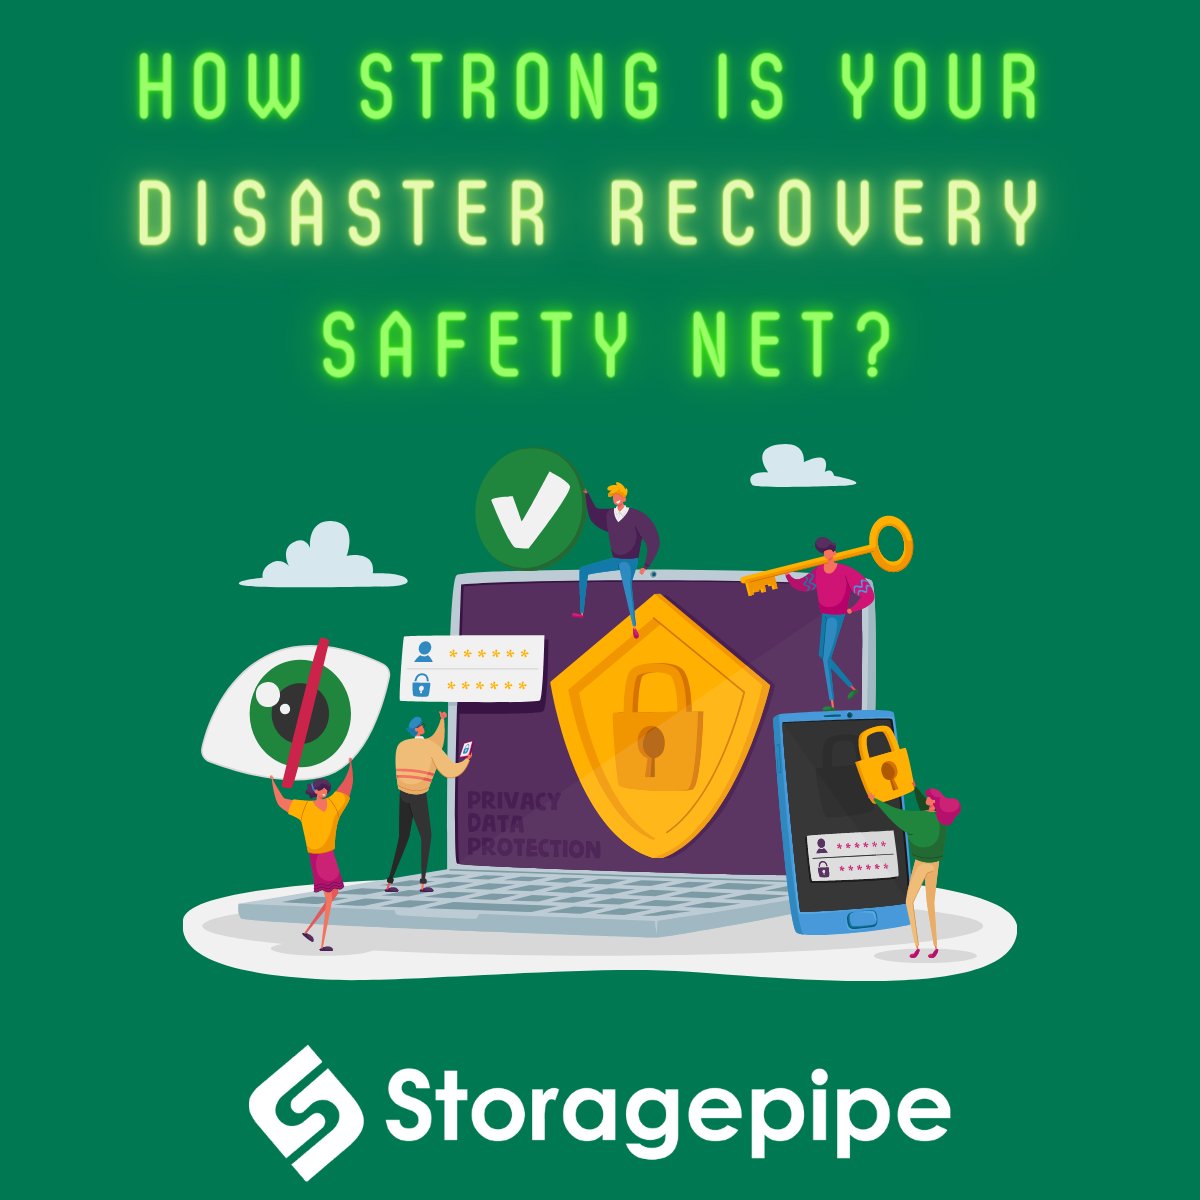 How Strong is Your Disaster Recovery Safety Net? Find out here: storagepipe.com/insights/how-s…

#storagepipe #ransomware #ransomwarerecovery #ransomwarerecoveryplan #ransomwarestats #ransomwarestatistics #disasterrecovery #dataprotection #cybersecurity #cloudbackup